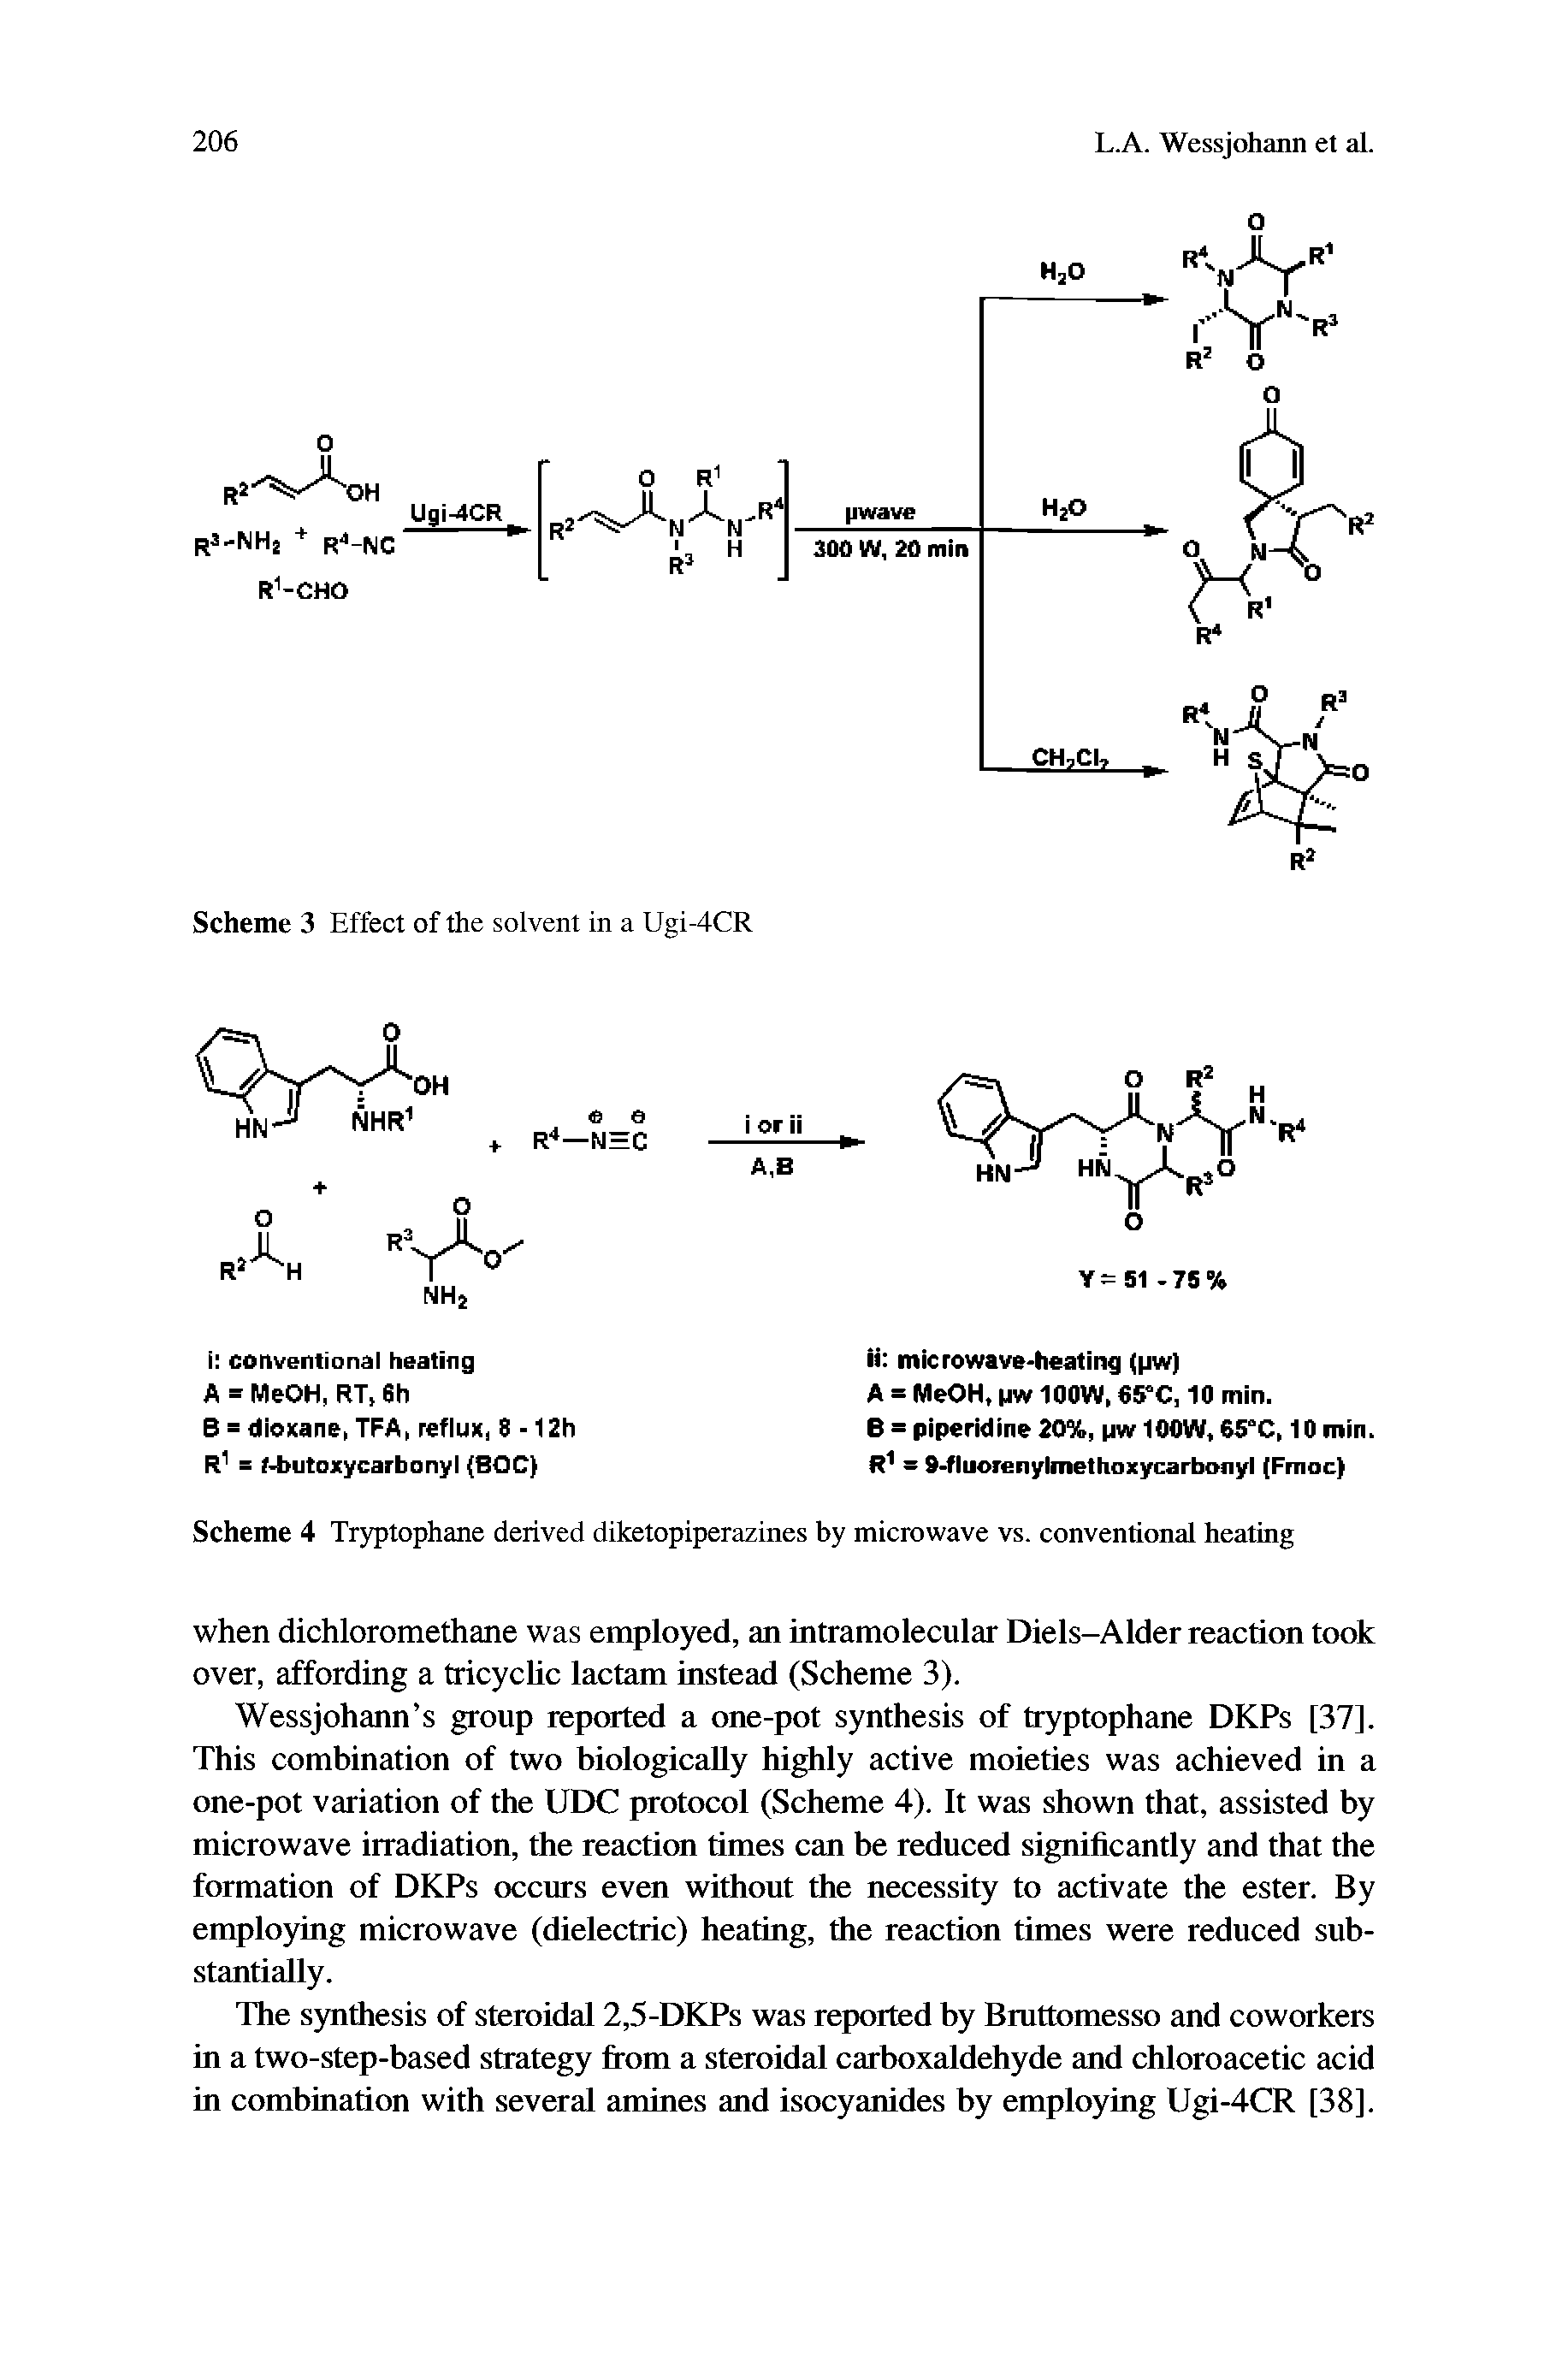 Scheme 4 Tryptophane derived diketopiperazines by microwave vs. conventional heating...